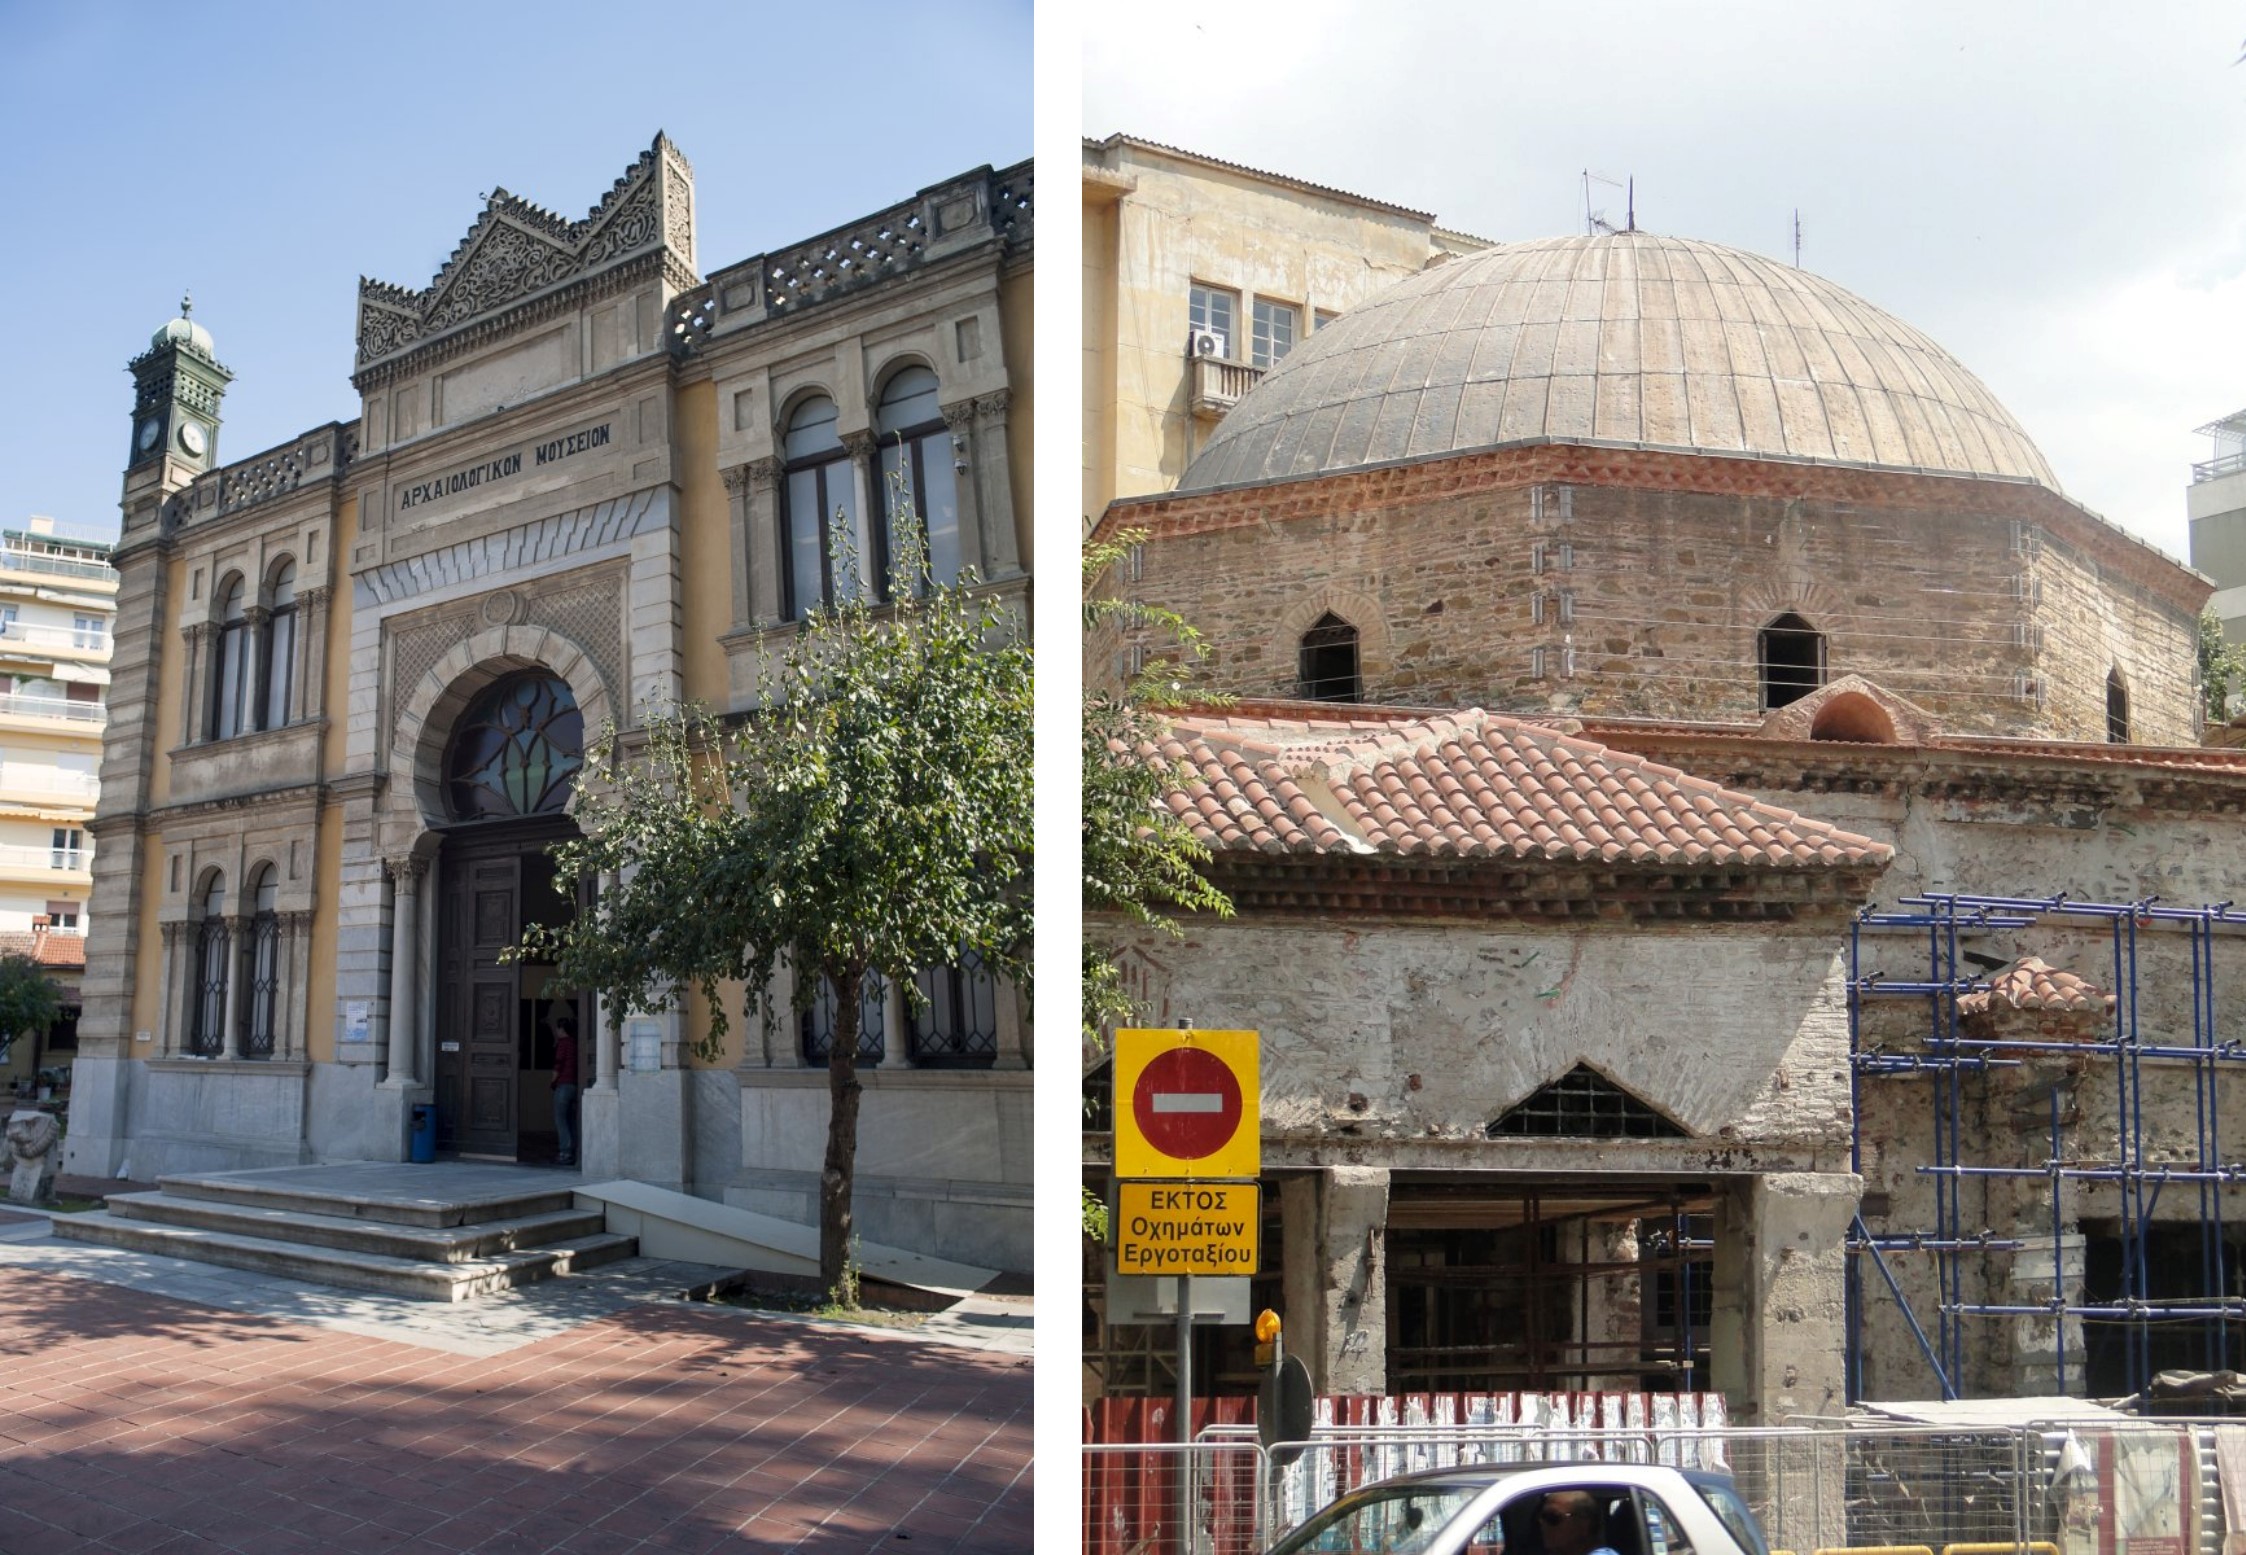 On the left, the Archaeological Museum. On the right, the Hamza Bey Mosque.